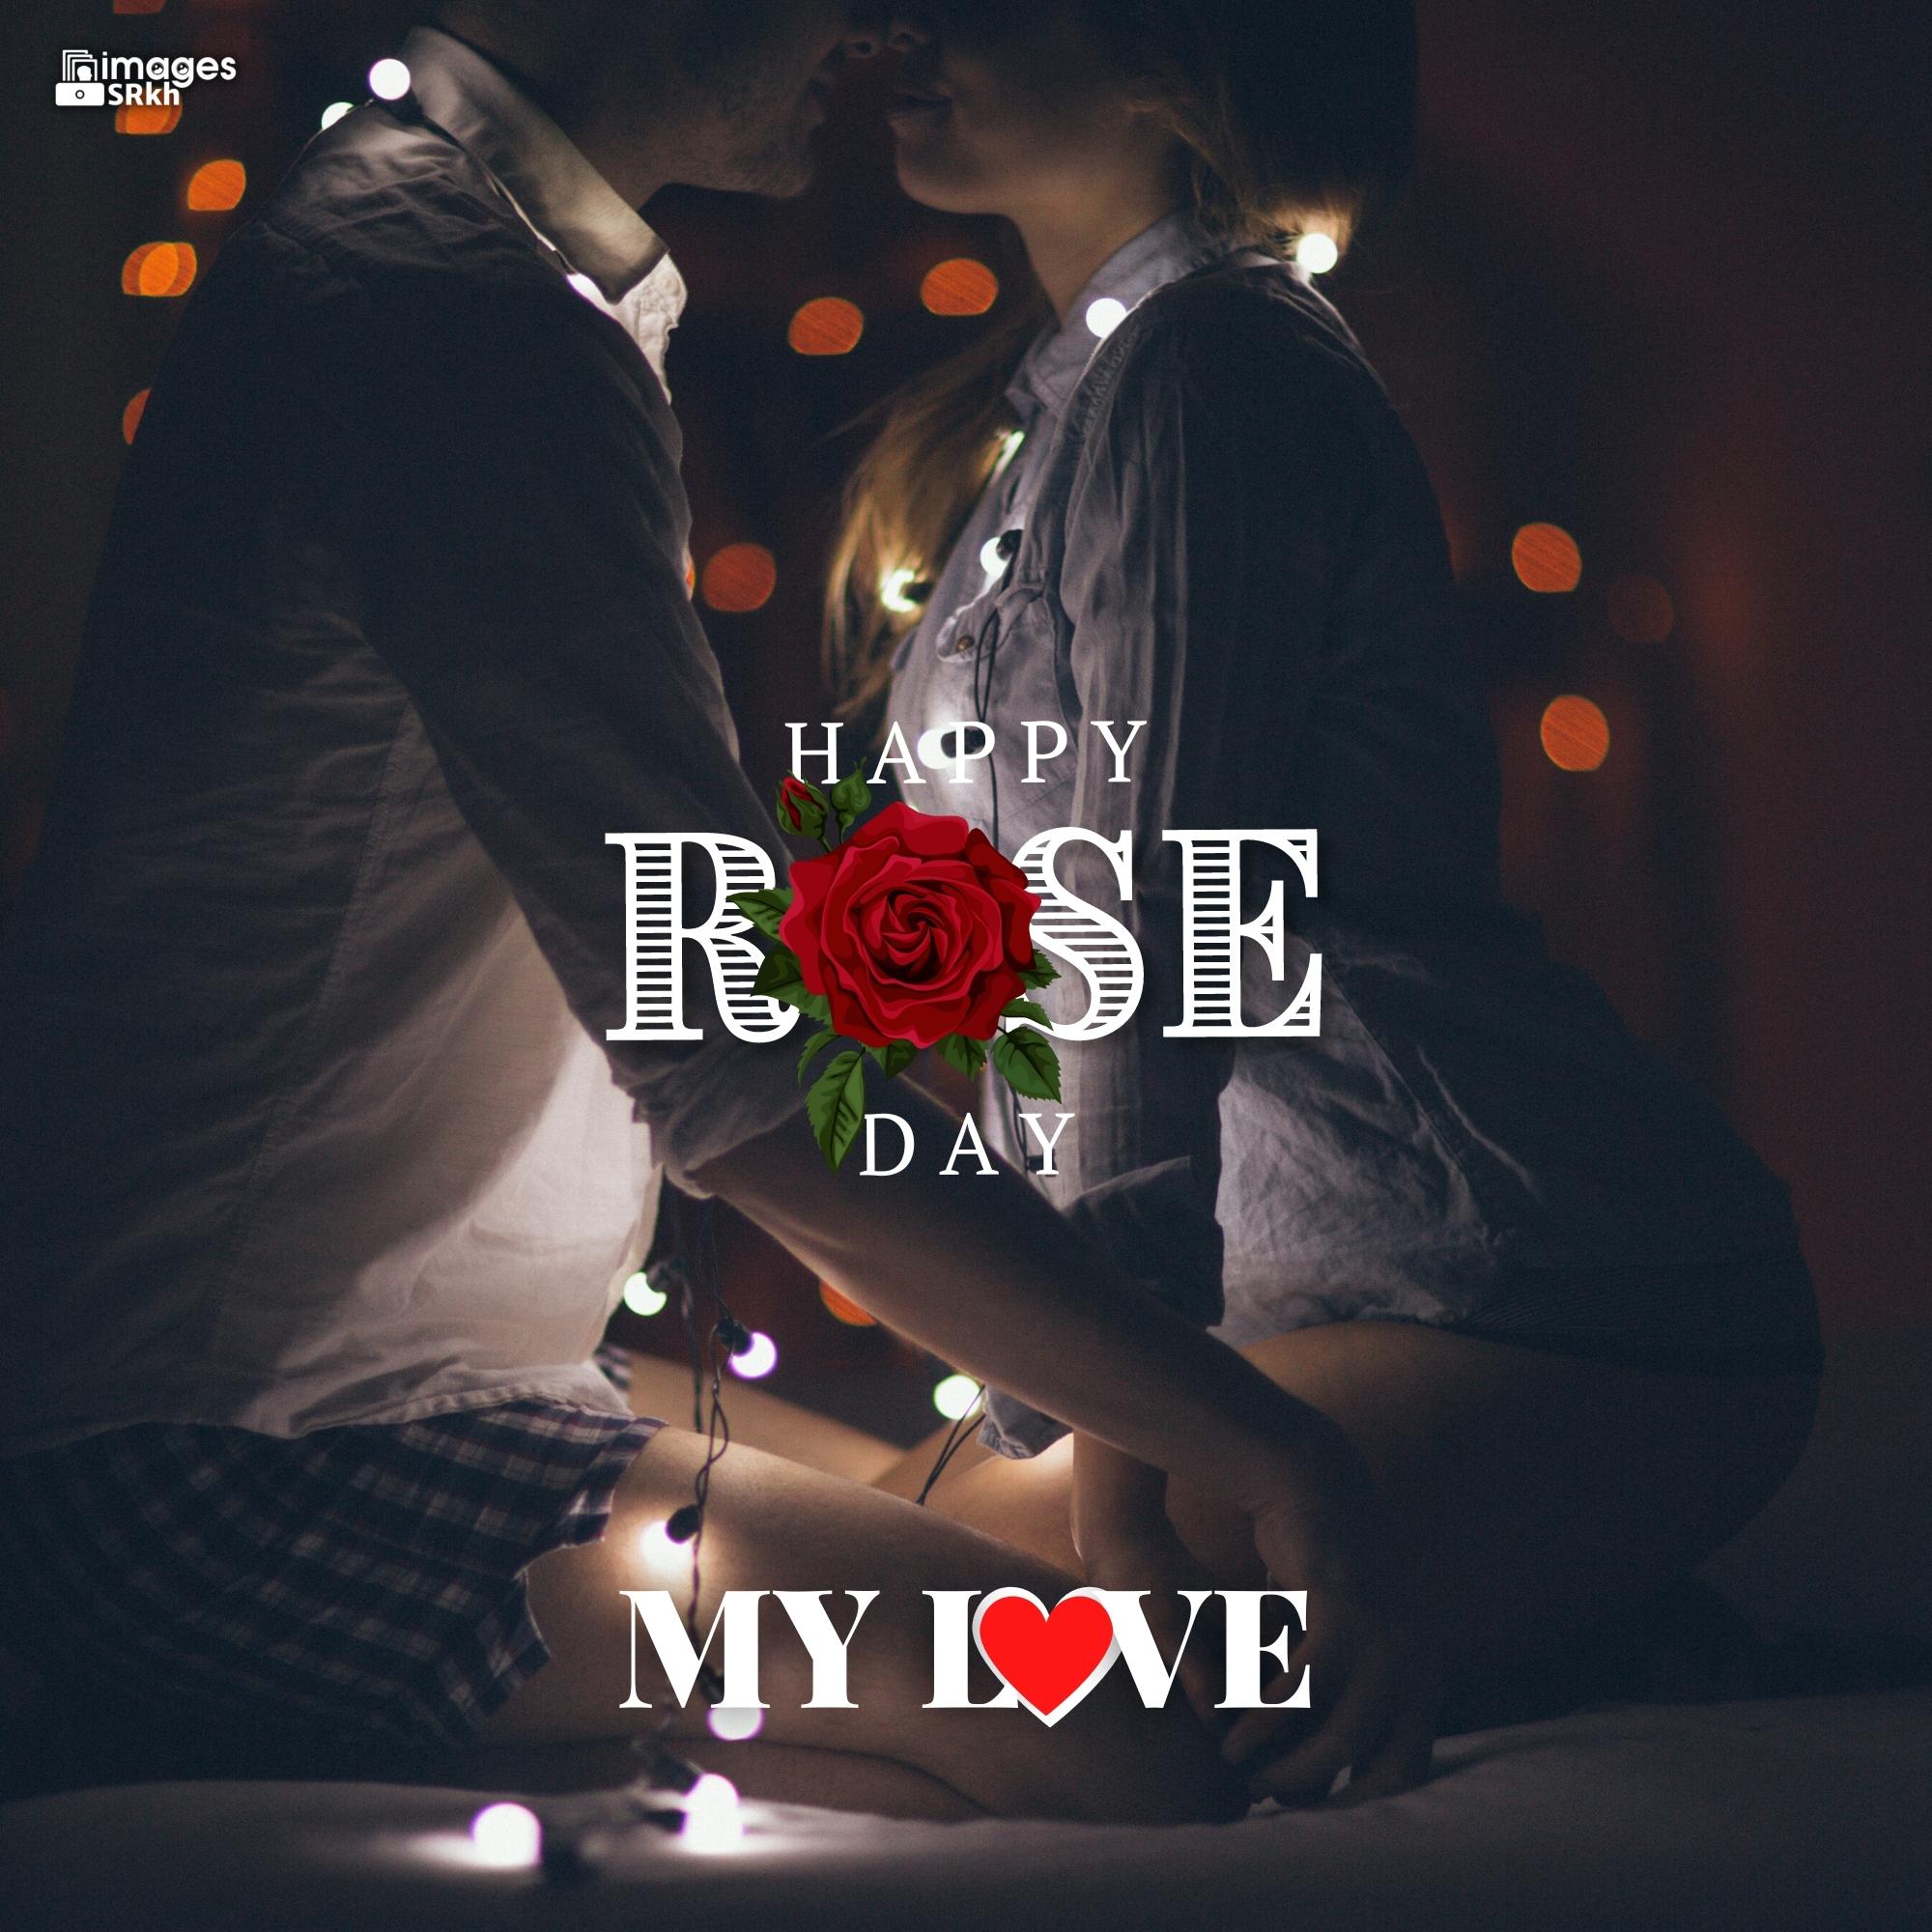 Happy Rose Day My Love (23) | HD IMAGES